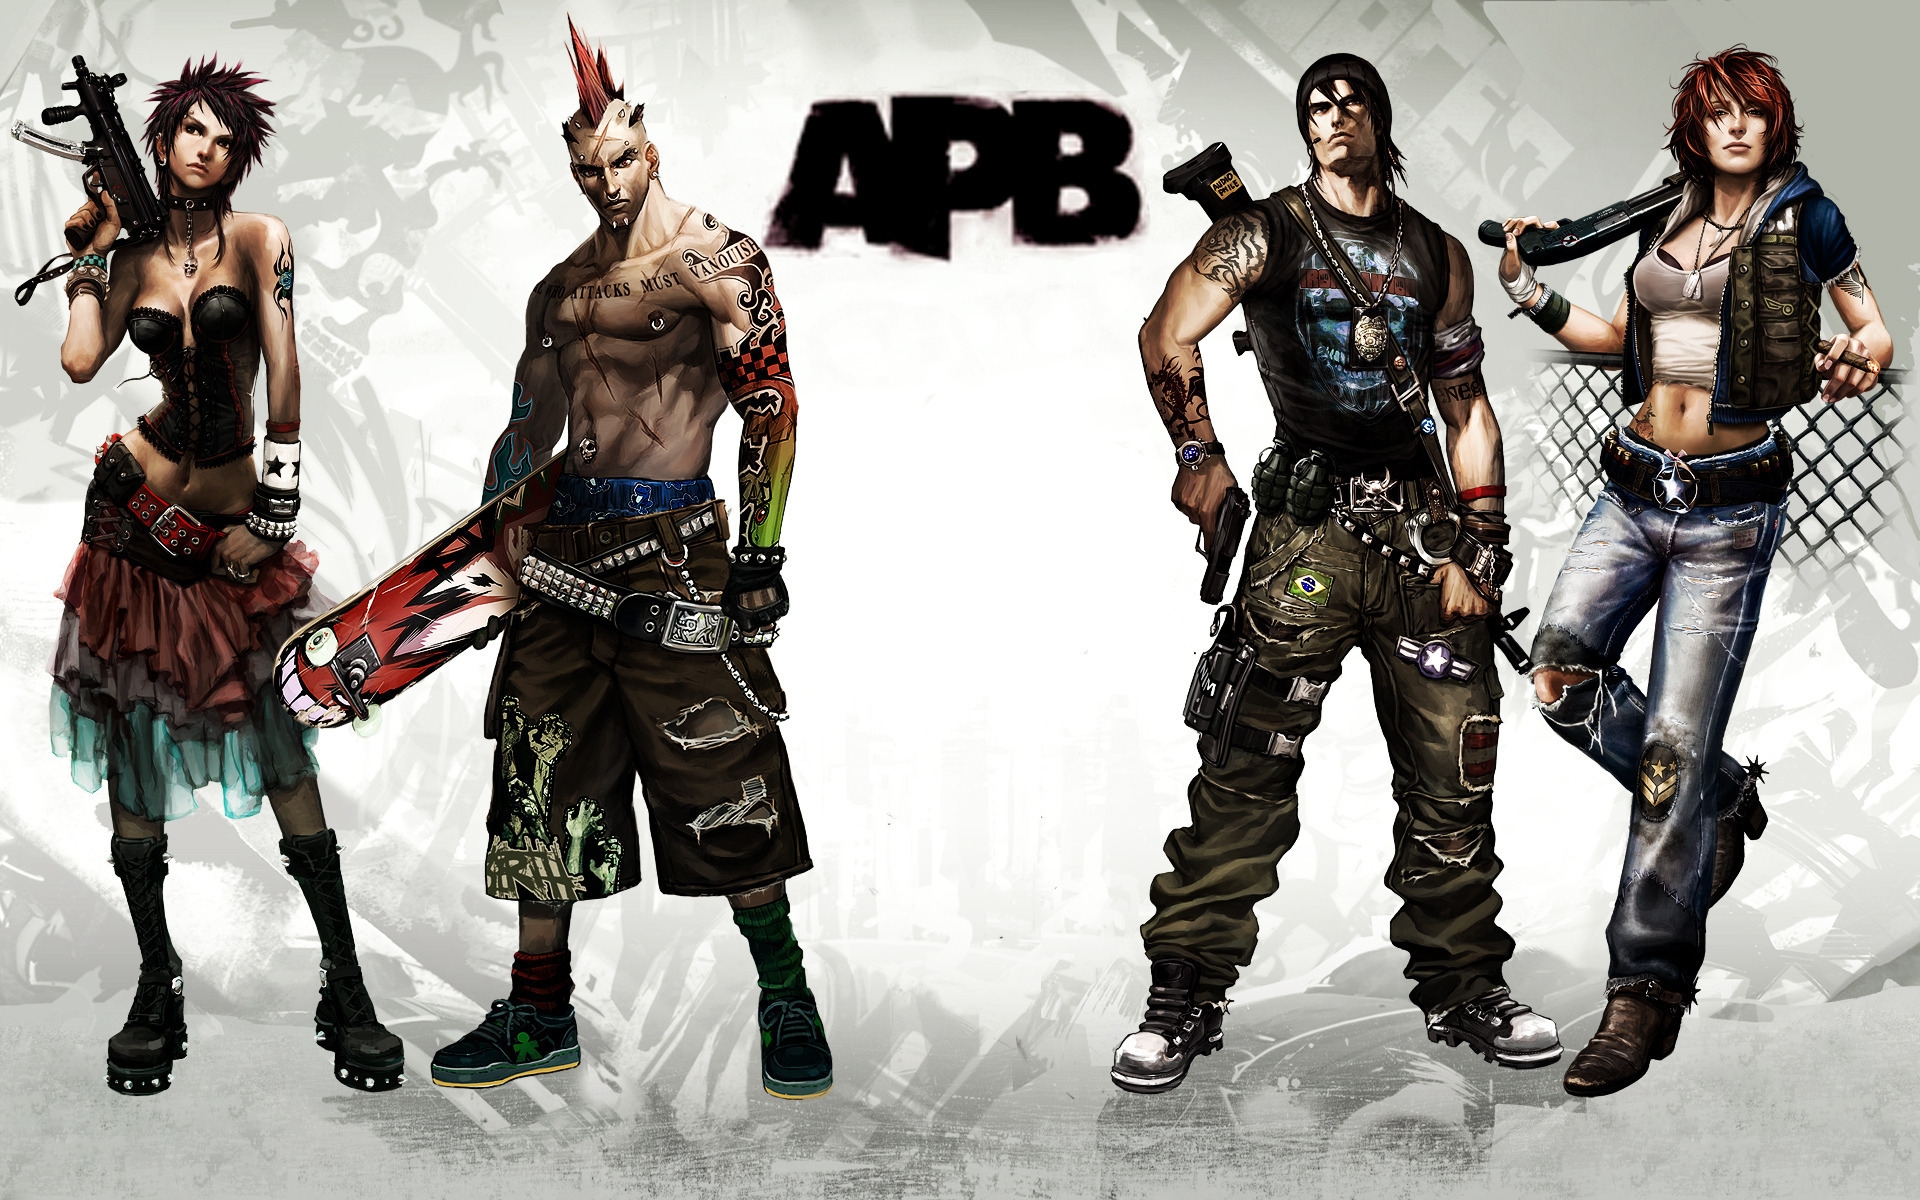 APB All Points Bulletin for 1920 x 1200 widescreen resolution